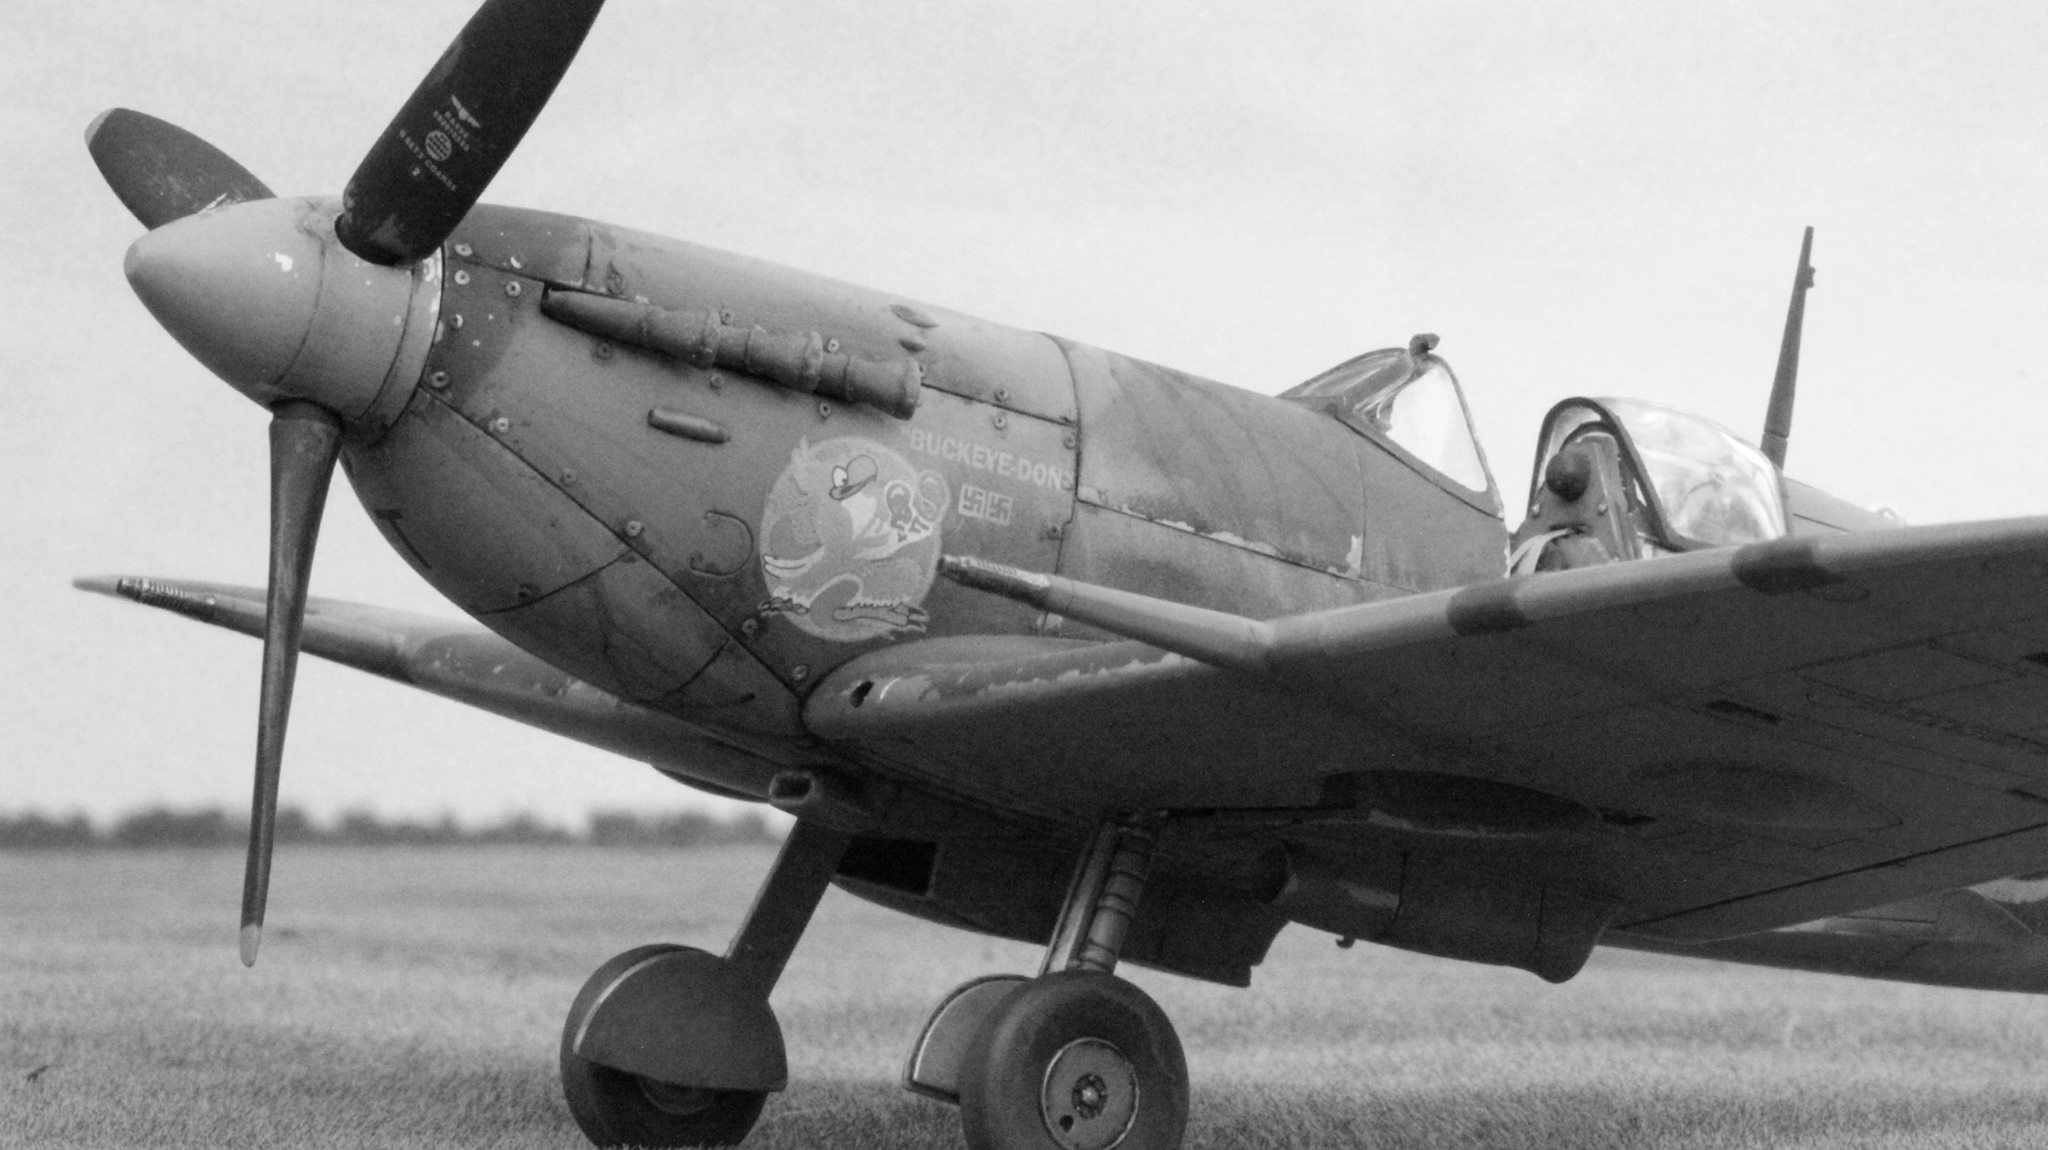 Spitfire Mk.Vb BL255 flown by Don Gentile 336th Fighter Squadron, 4th Fighter Group, USAAF at Debden August 1942